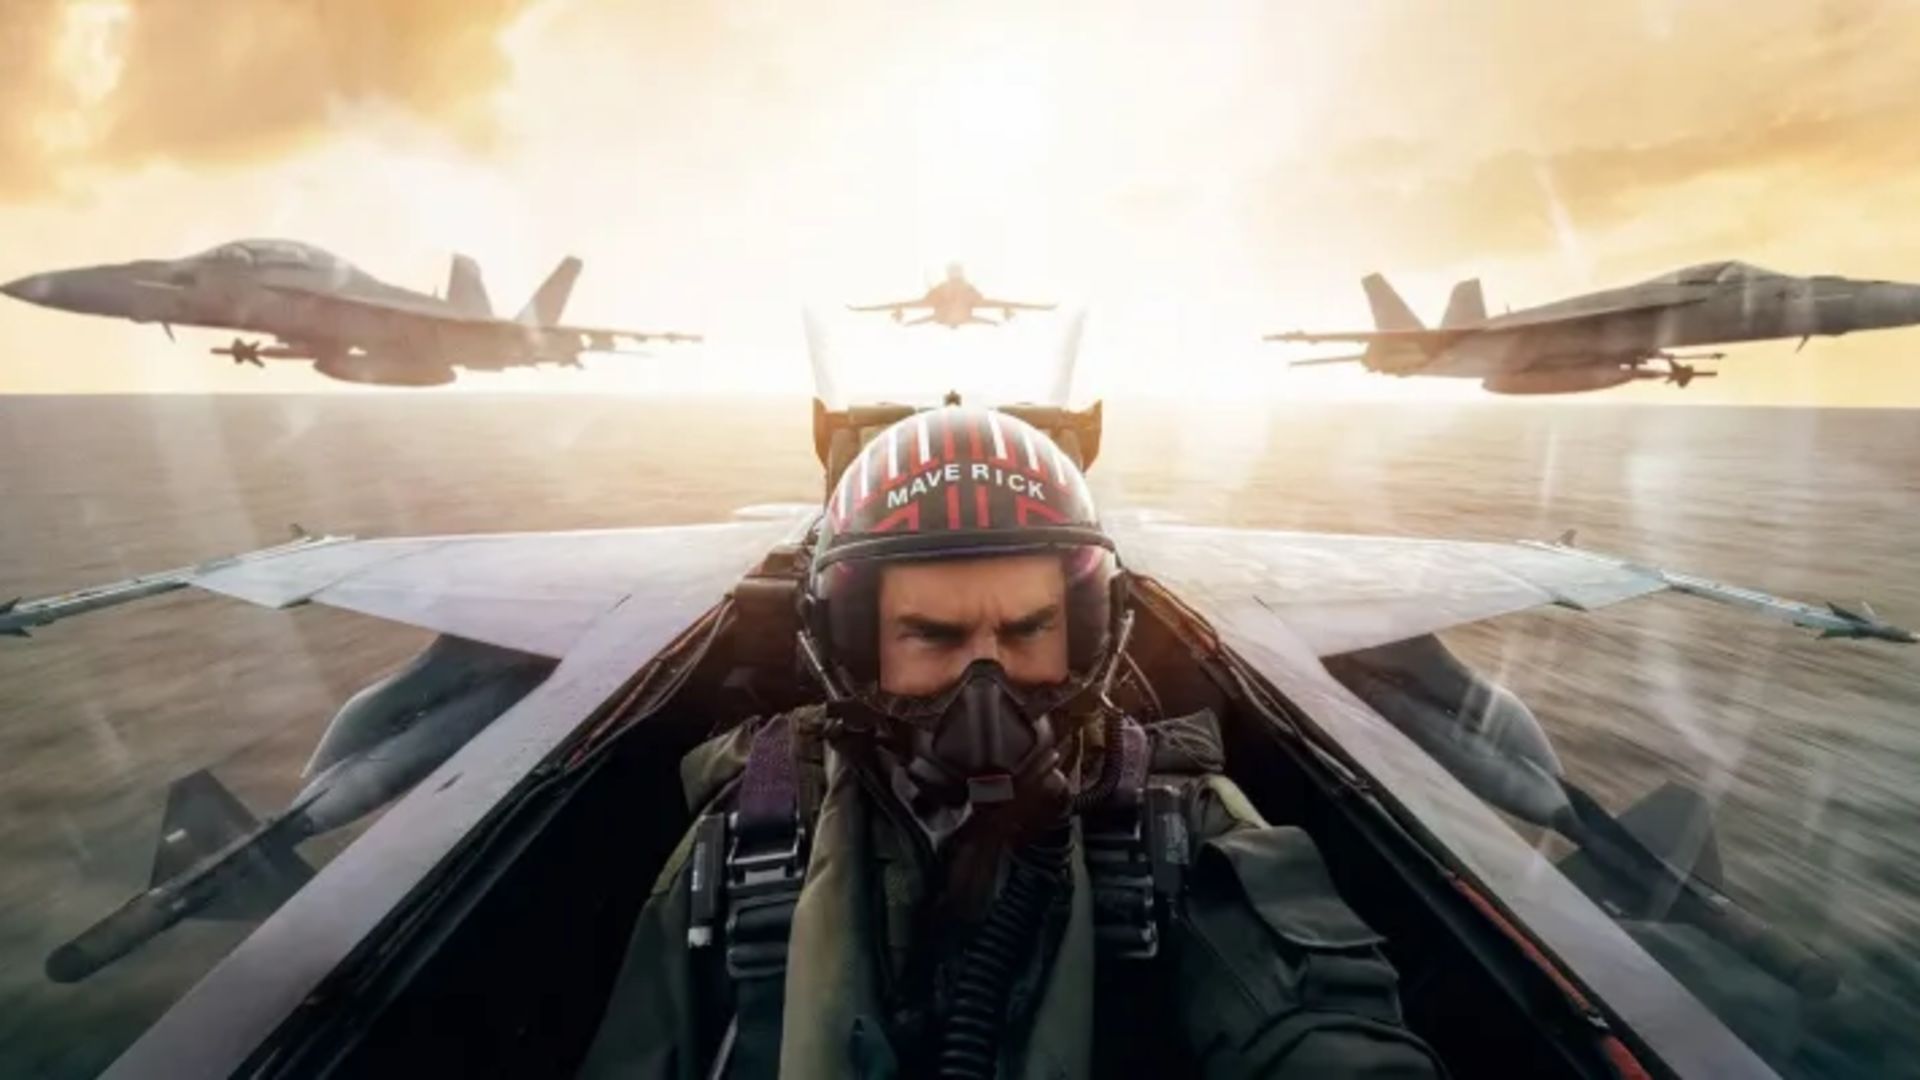 Video: TOPGUN Pilots Are Charged $5 for Quoting From a Certain 1986 Film